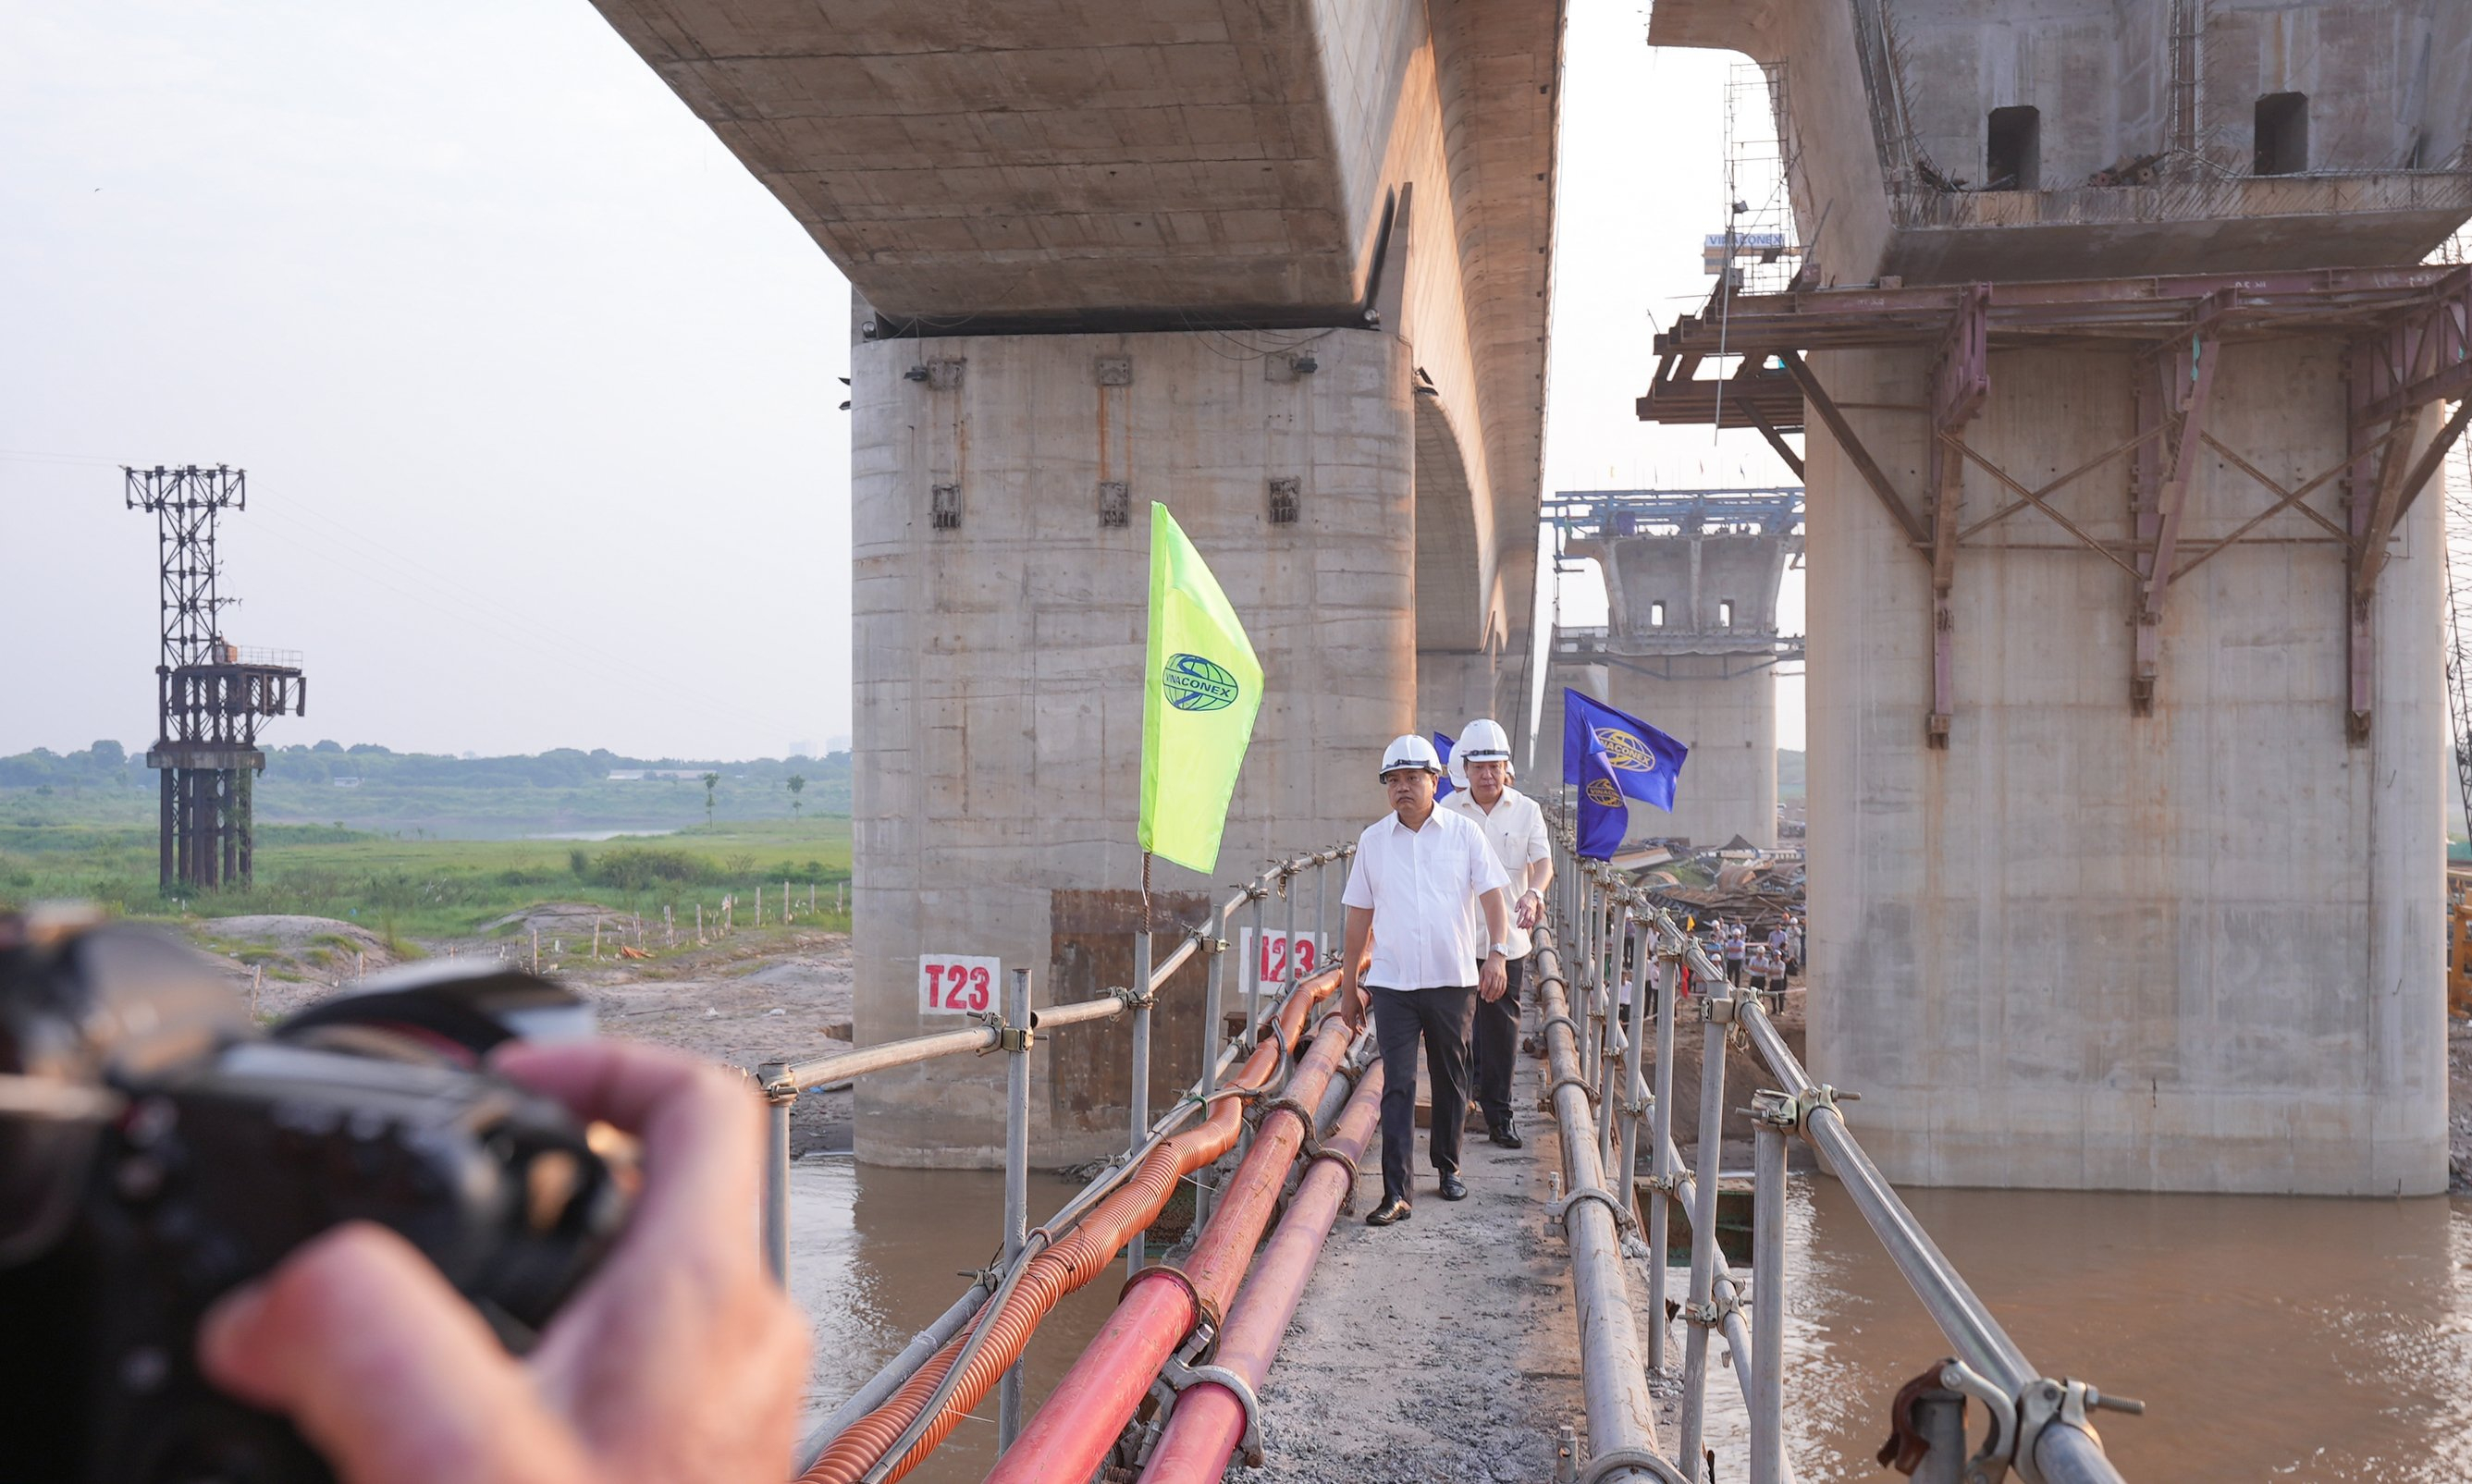 CHAIRMAN OF THE HANOI PEOPLE'S COMMITTEE WORKING AT VINH TUY BRIDGE CONSTRUCTION PROJECT PHASE 2